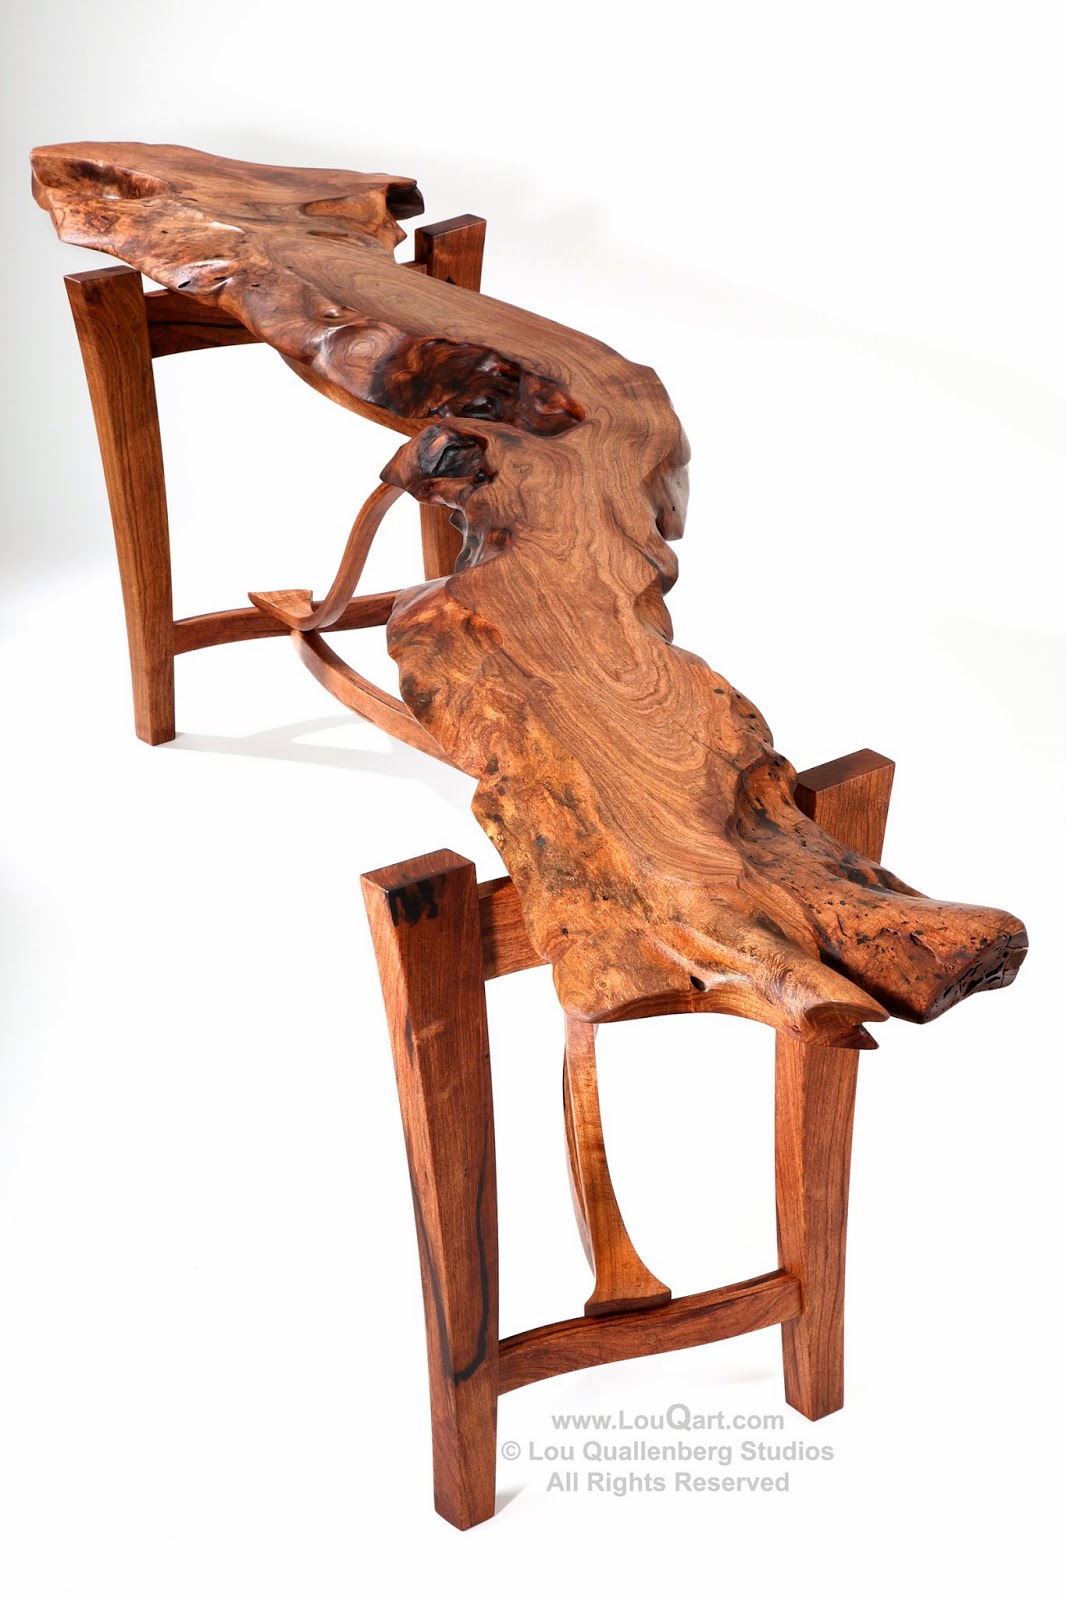 Mesquite Musings Making Mesquite Furniture Texas Style